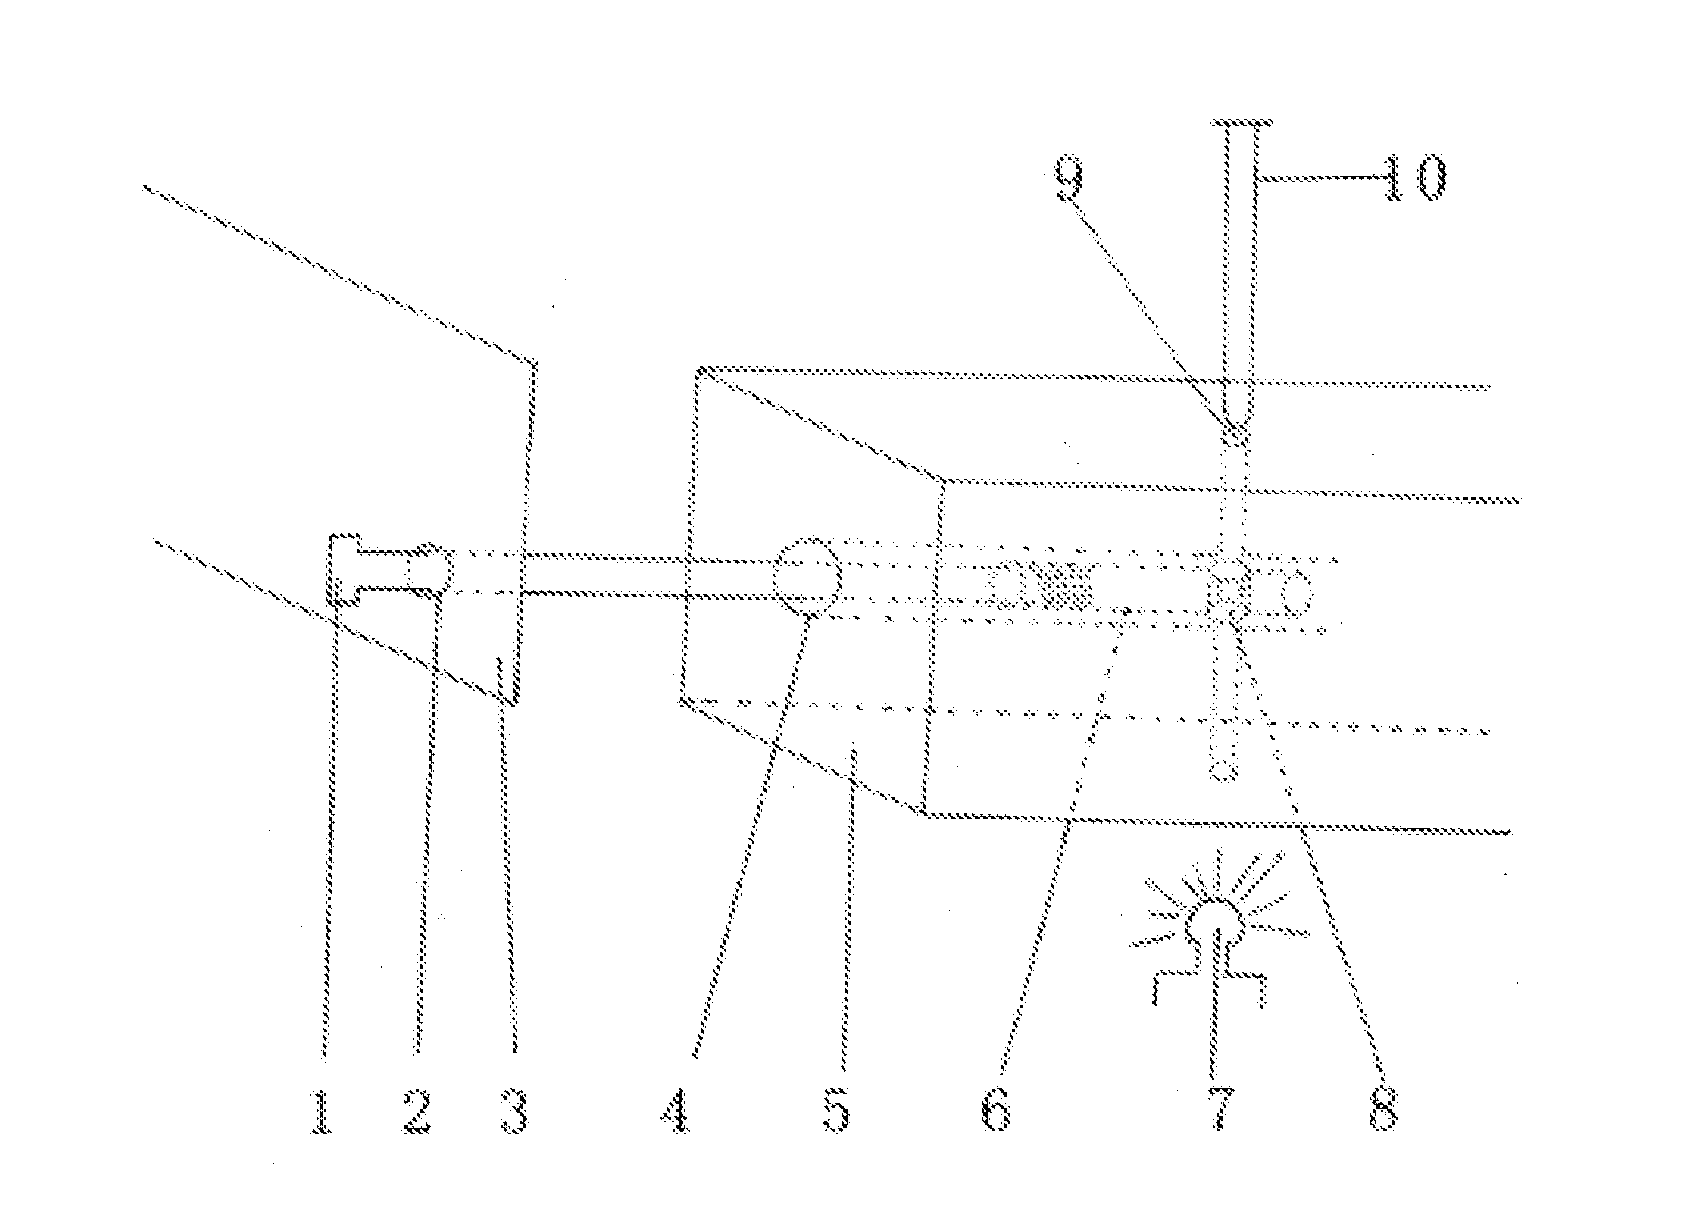 Connection structure for woodware part